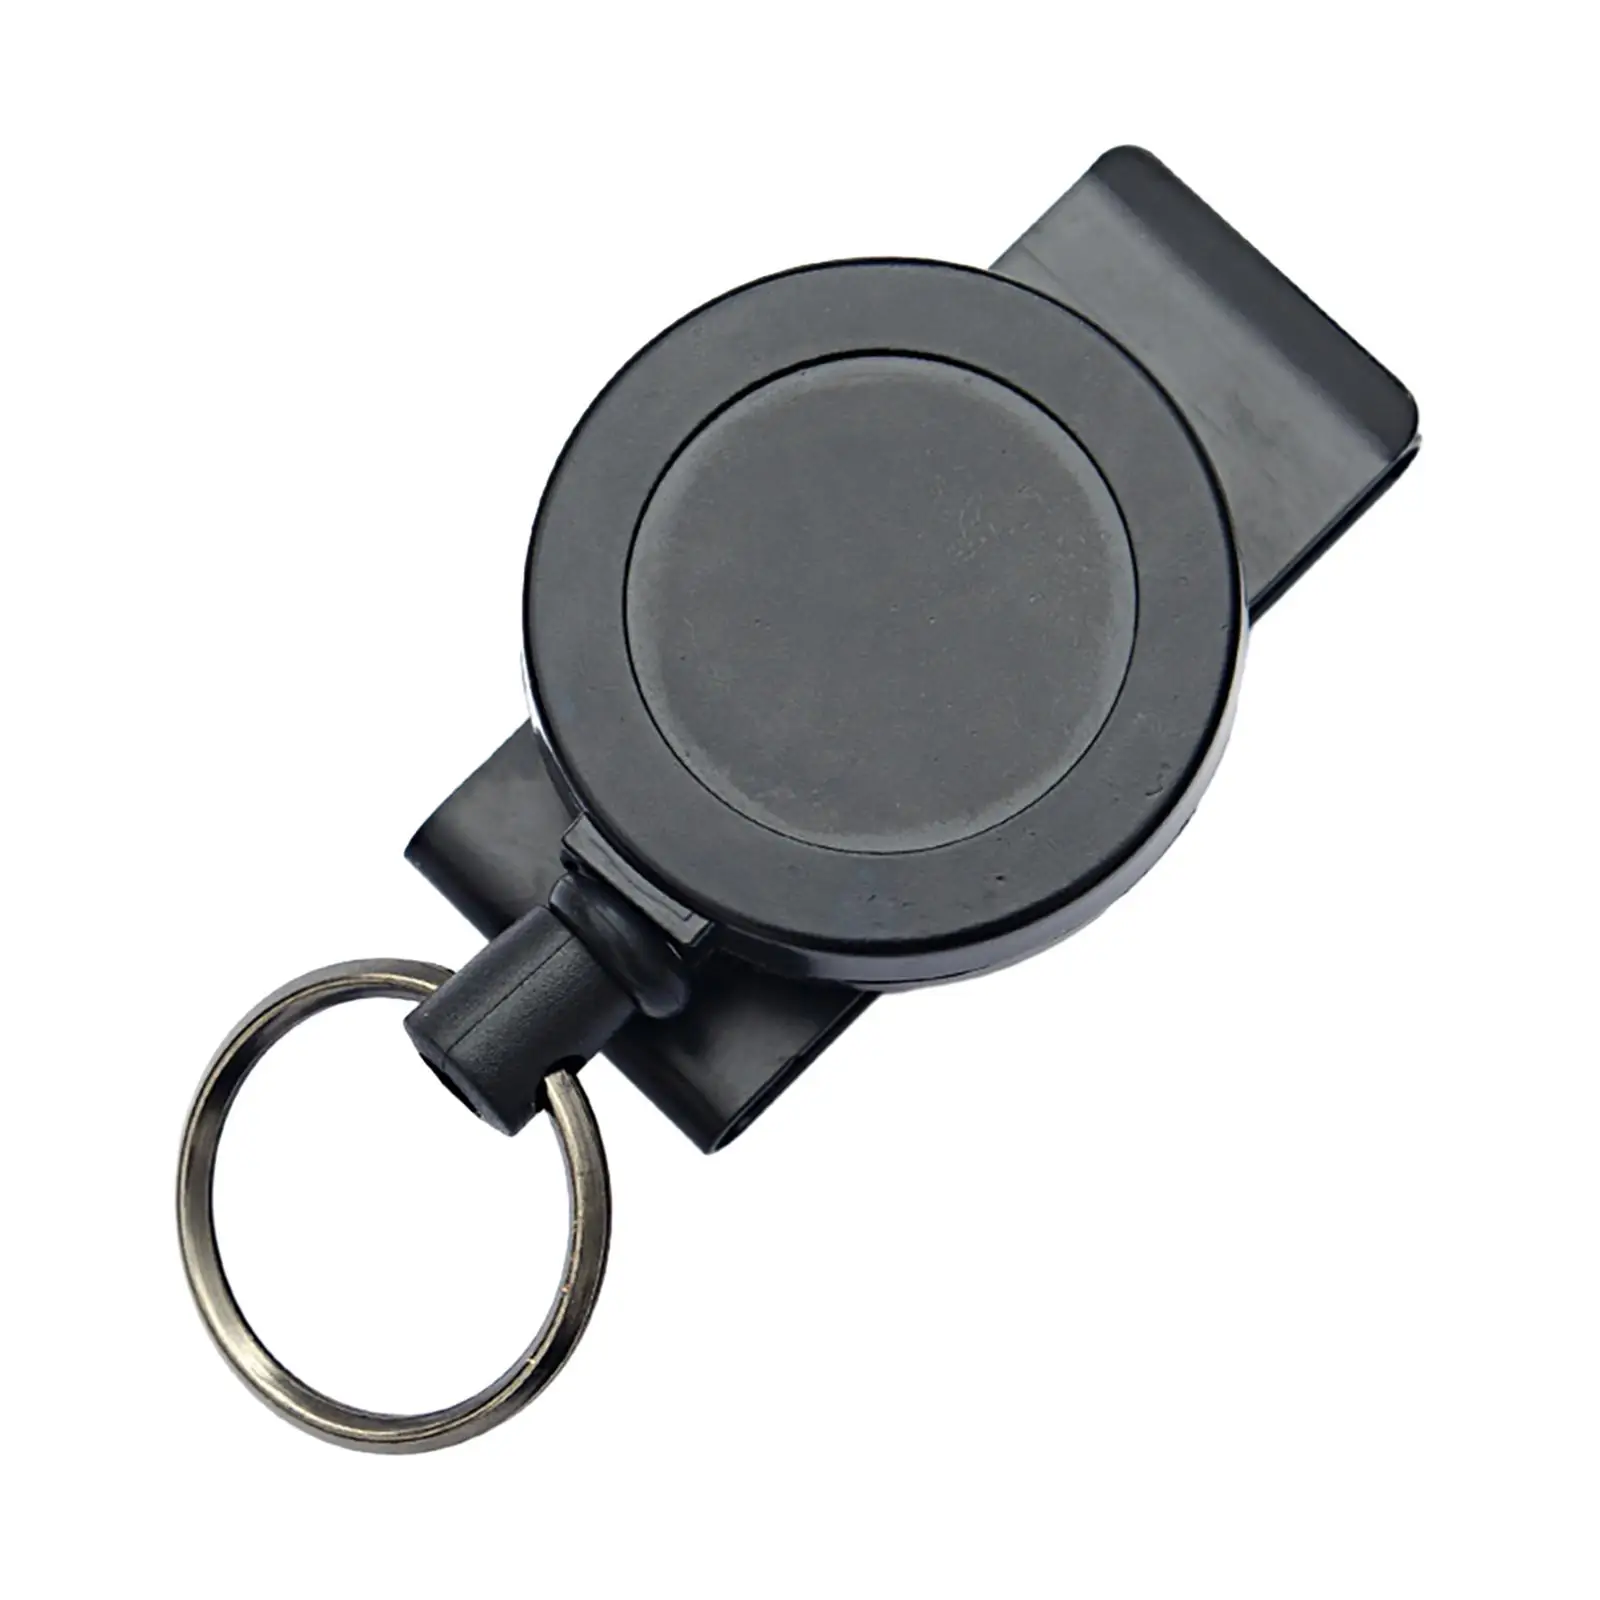 Retractable Keychain Multifunctional Key Holder for Climbing Outdoor Homes